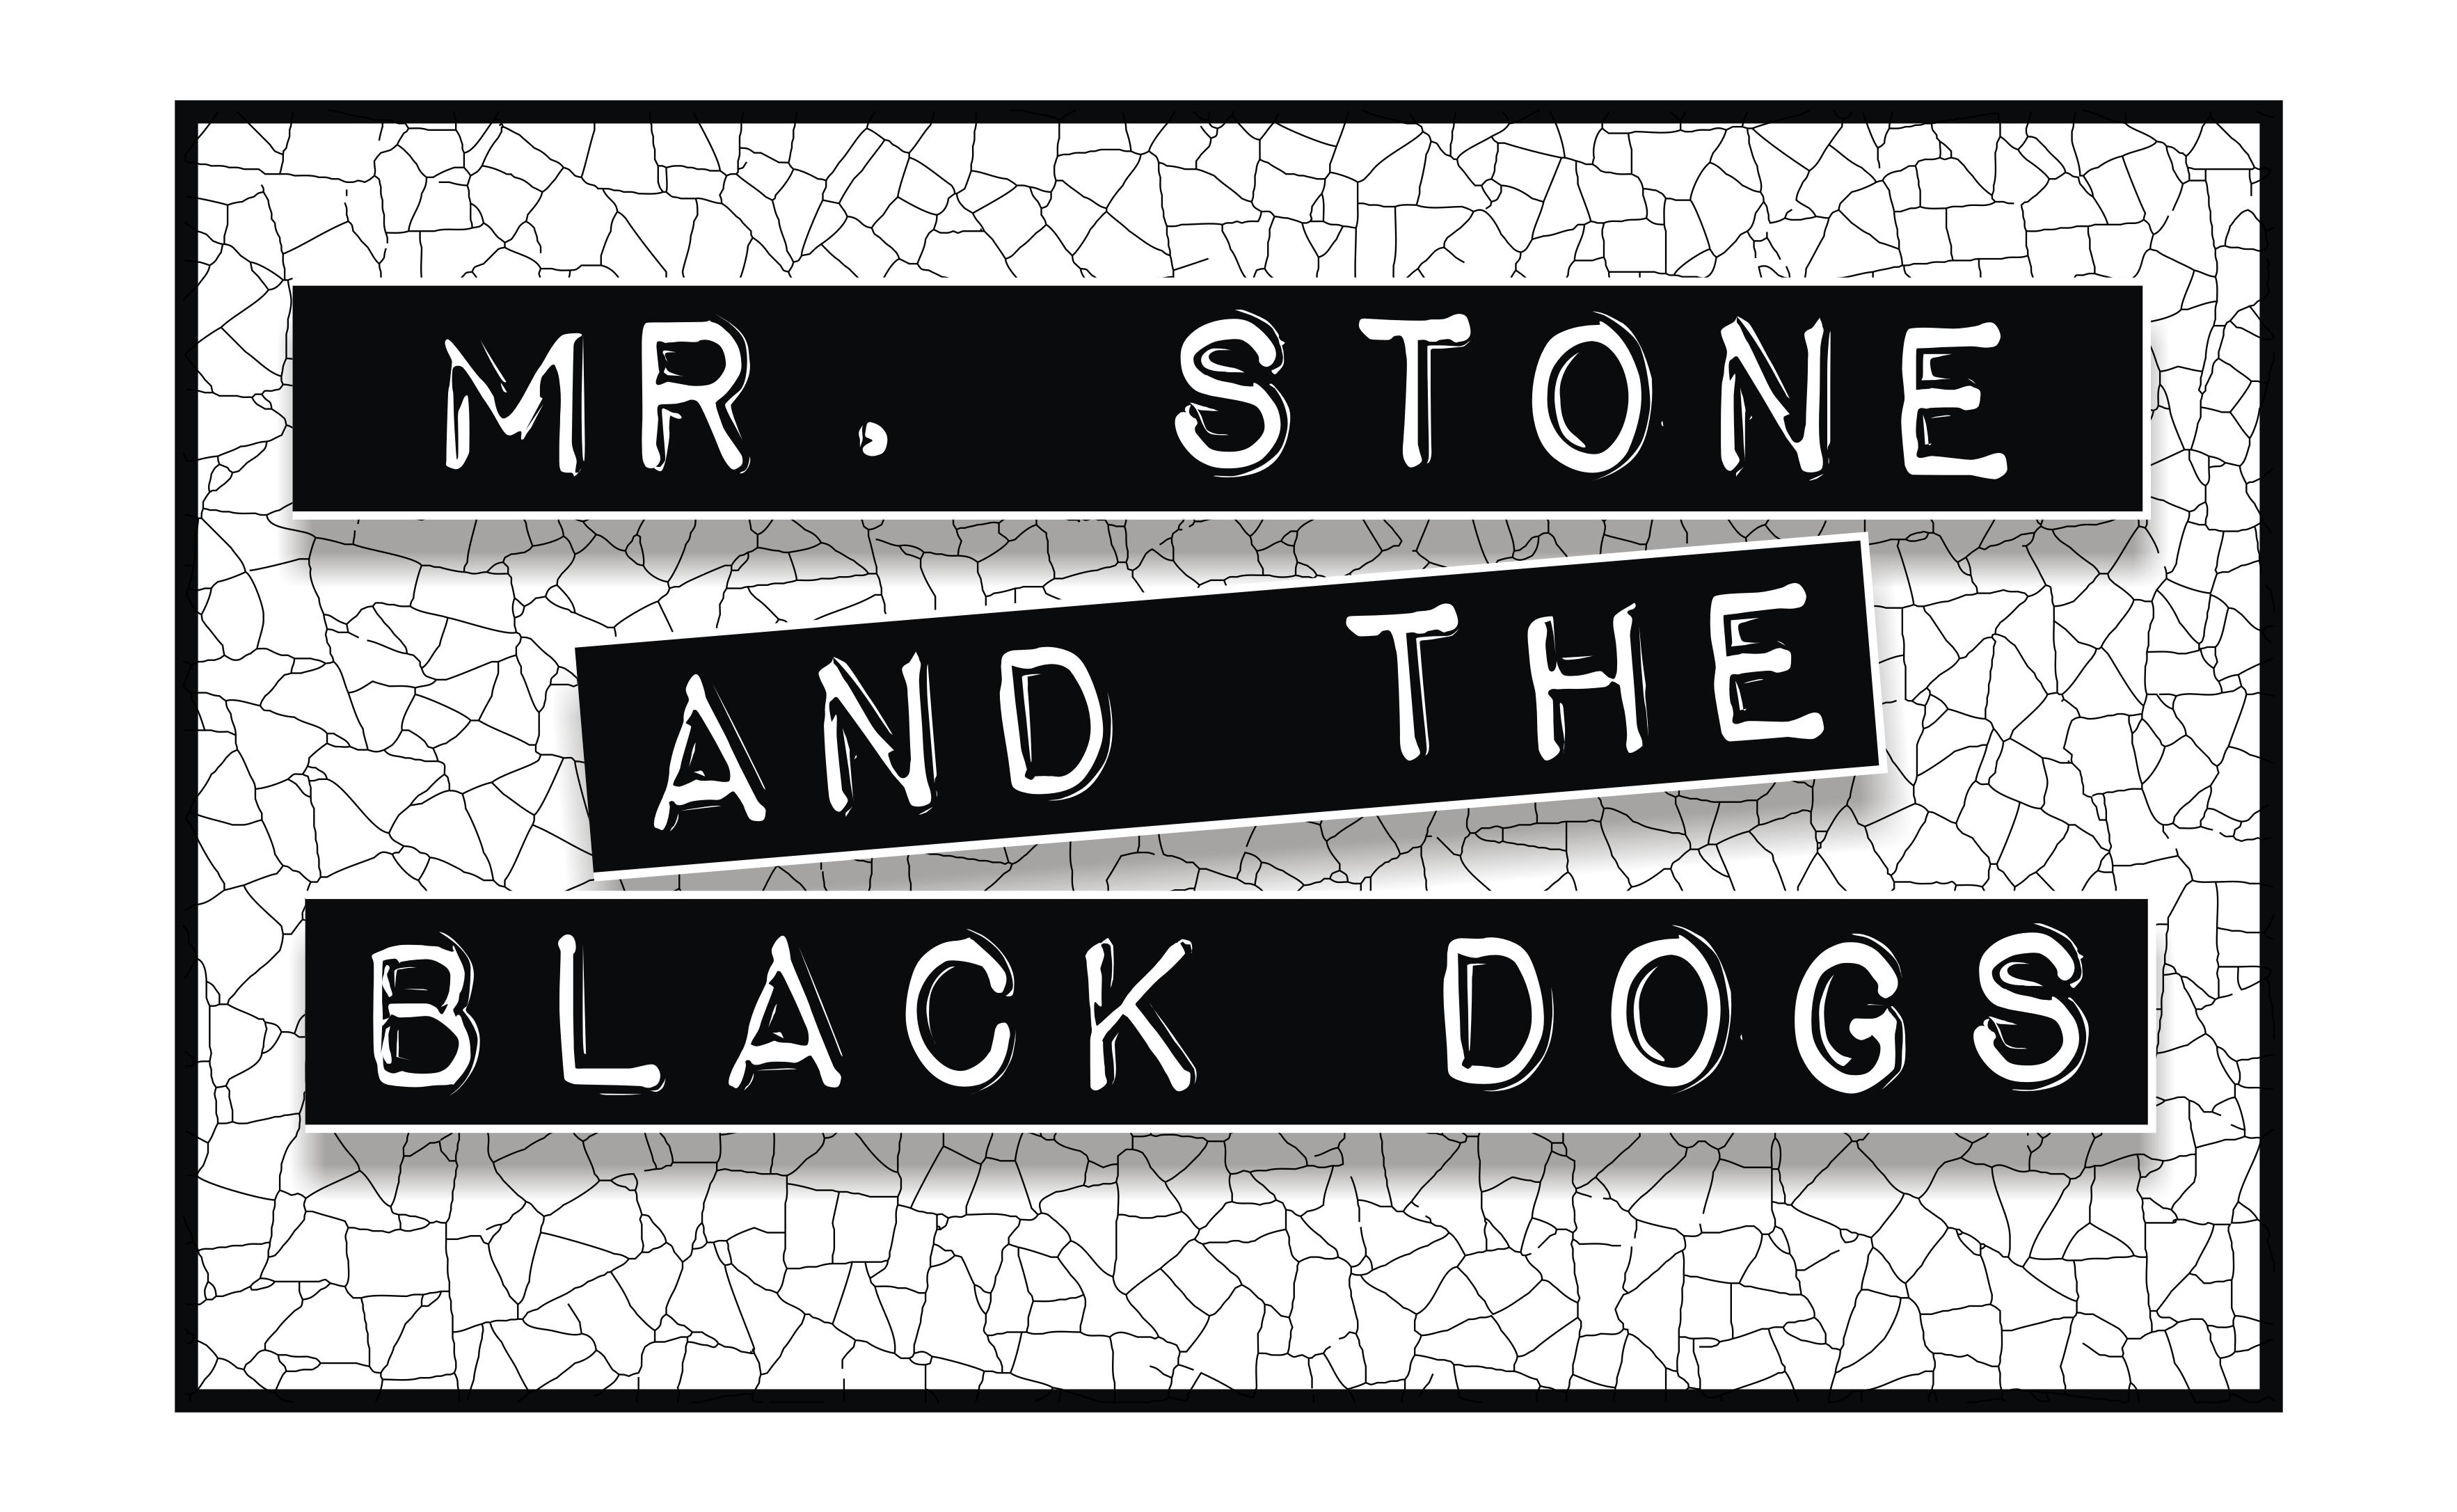 Mr Stone and the Black Dogs